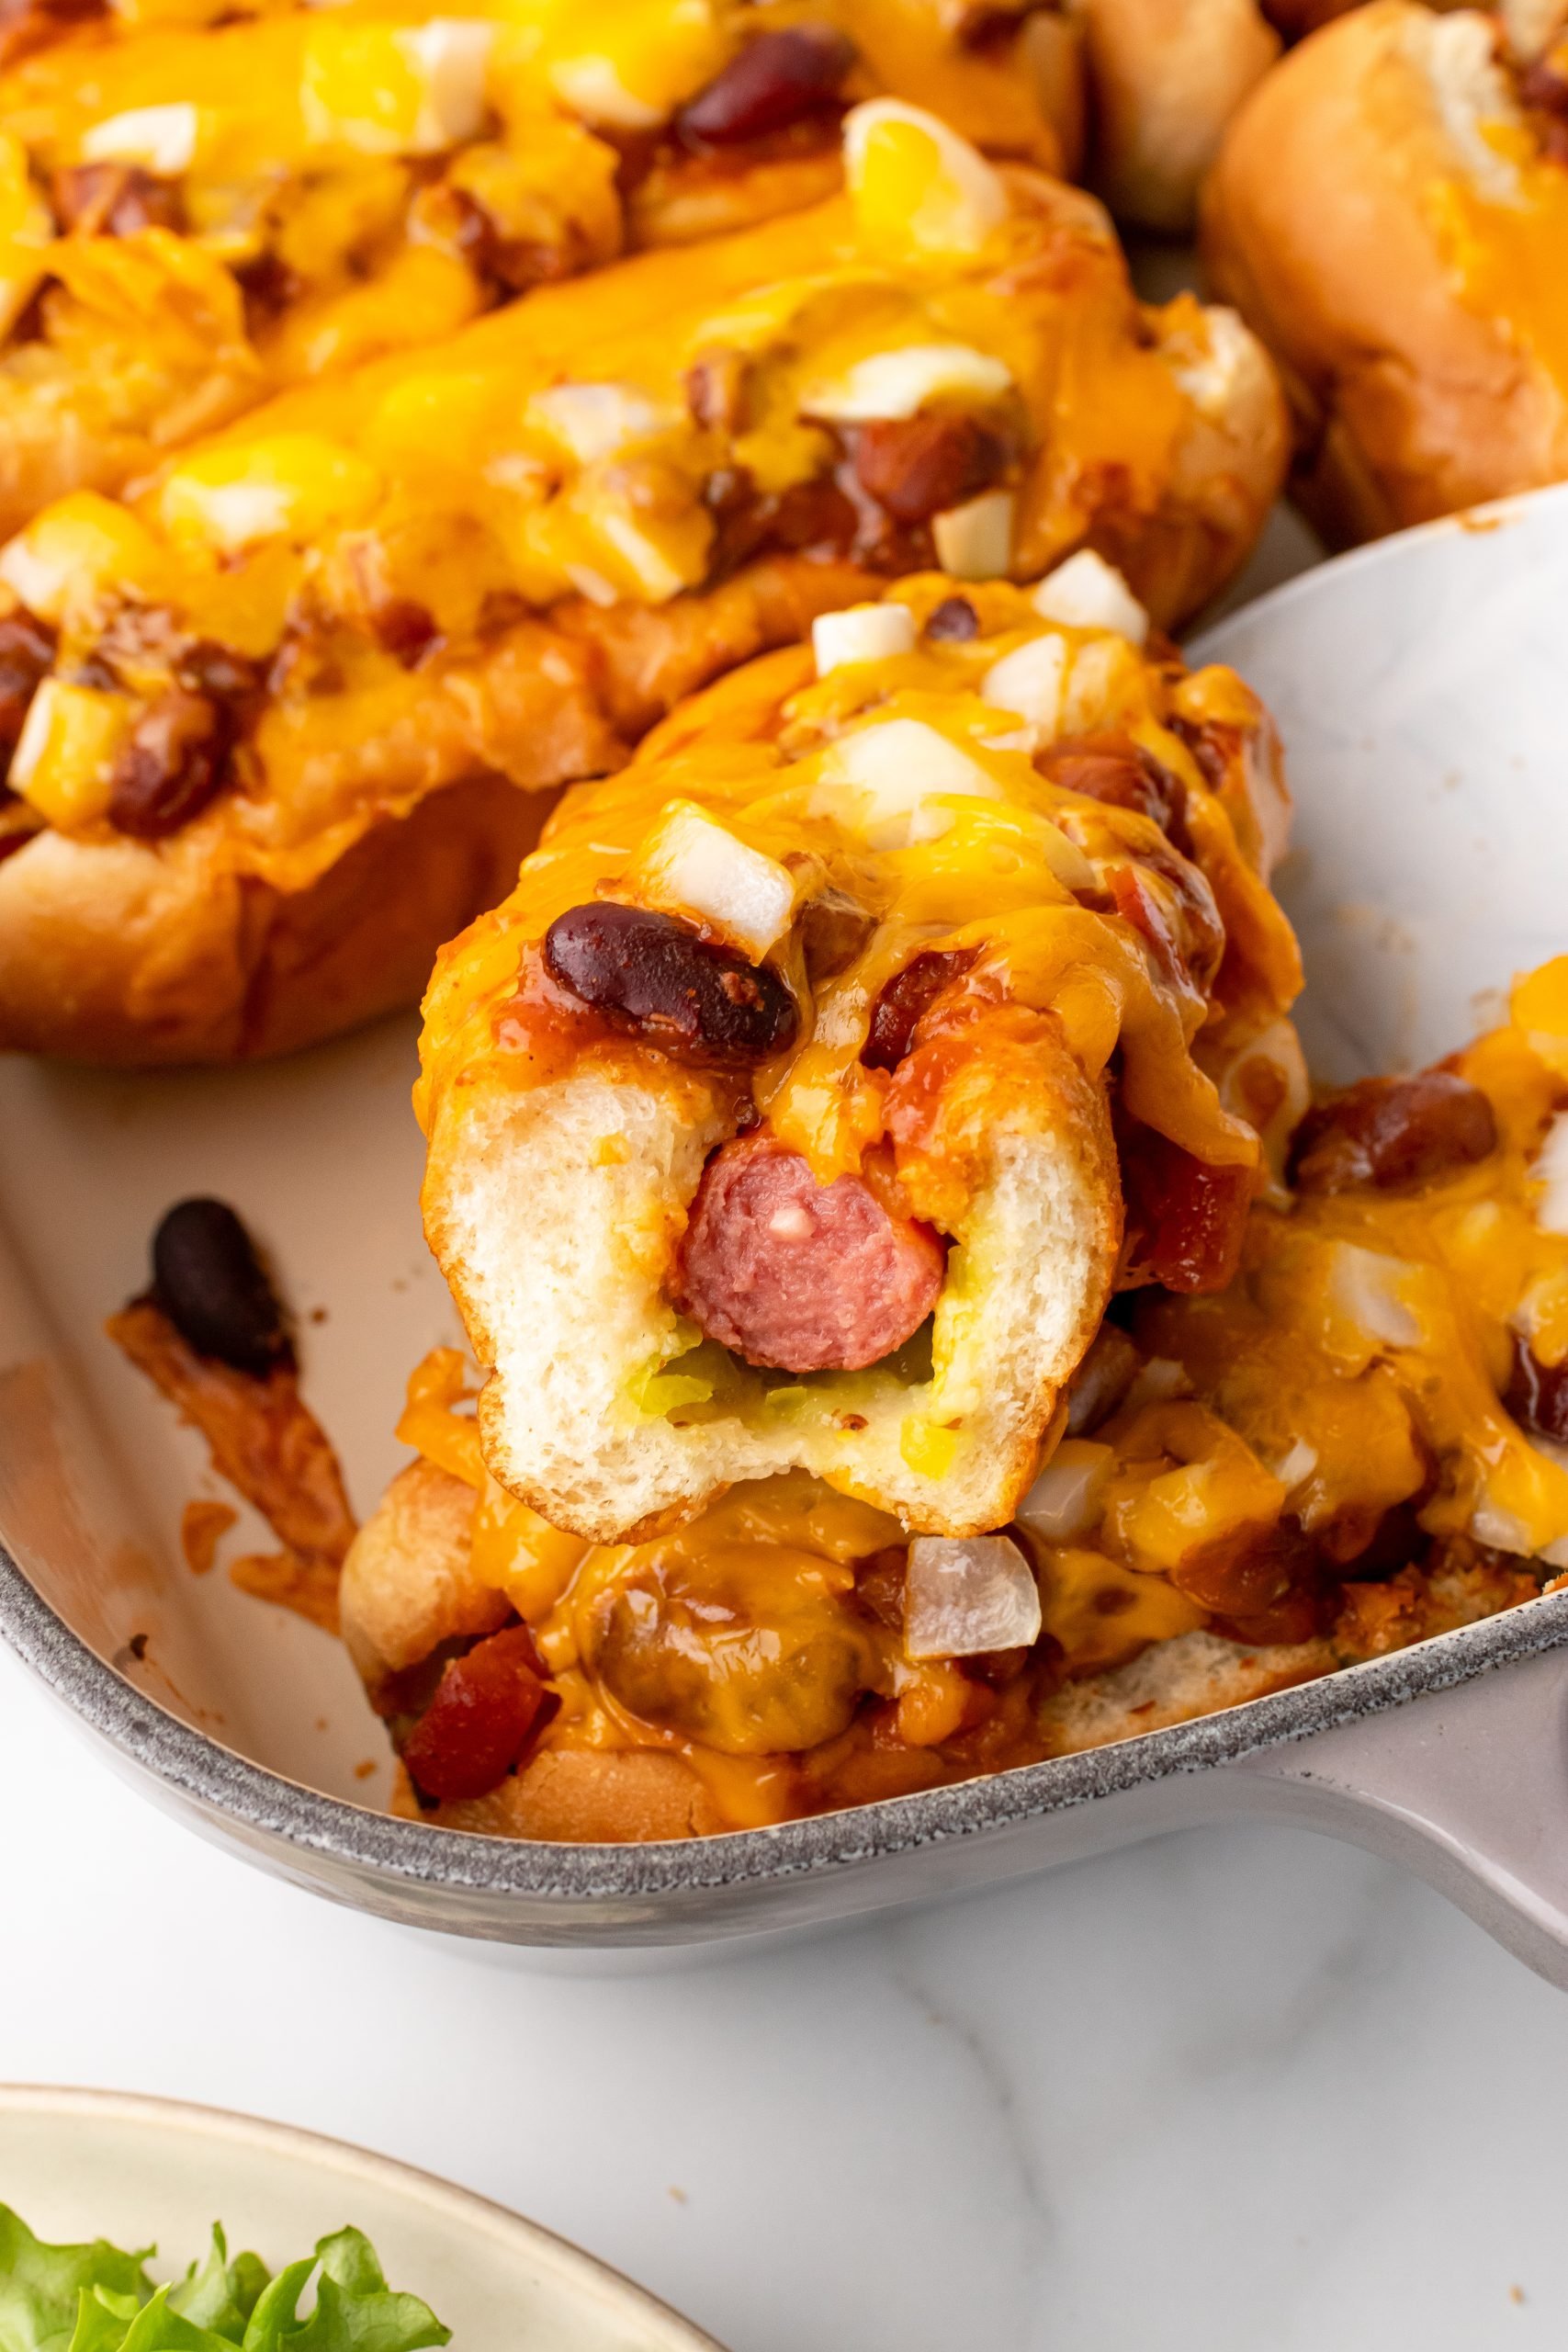 Baked Hot Dogs Recipe (Oven Method)